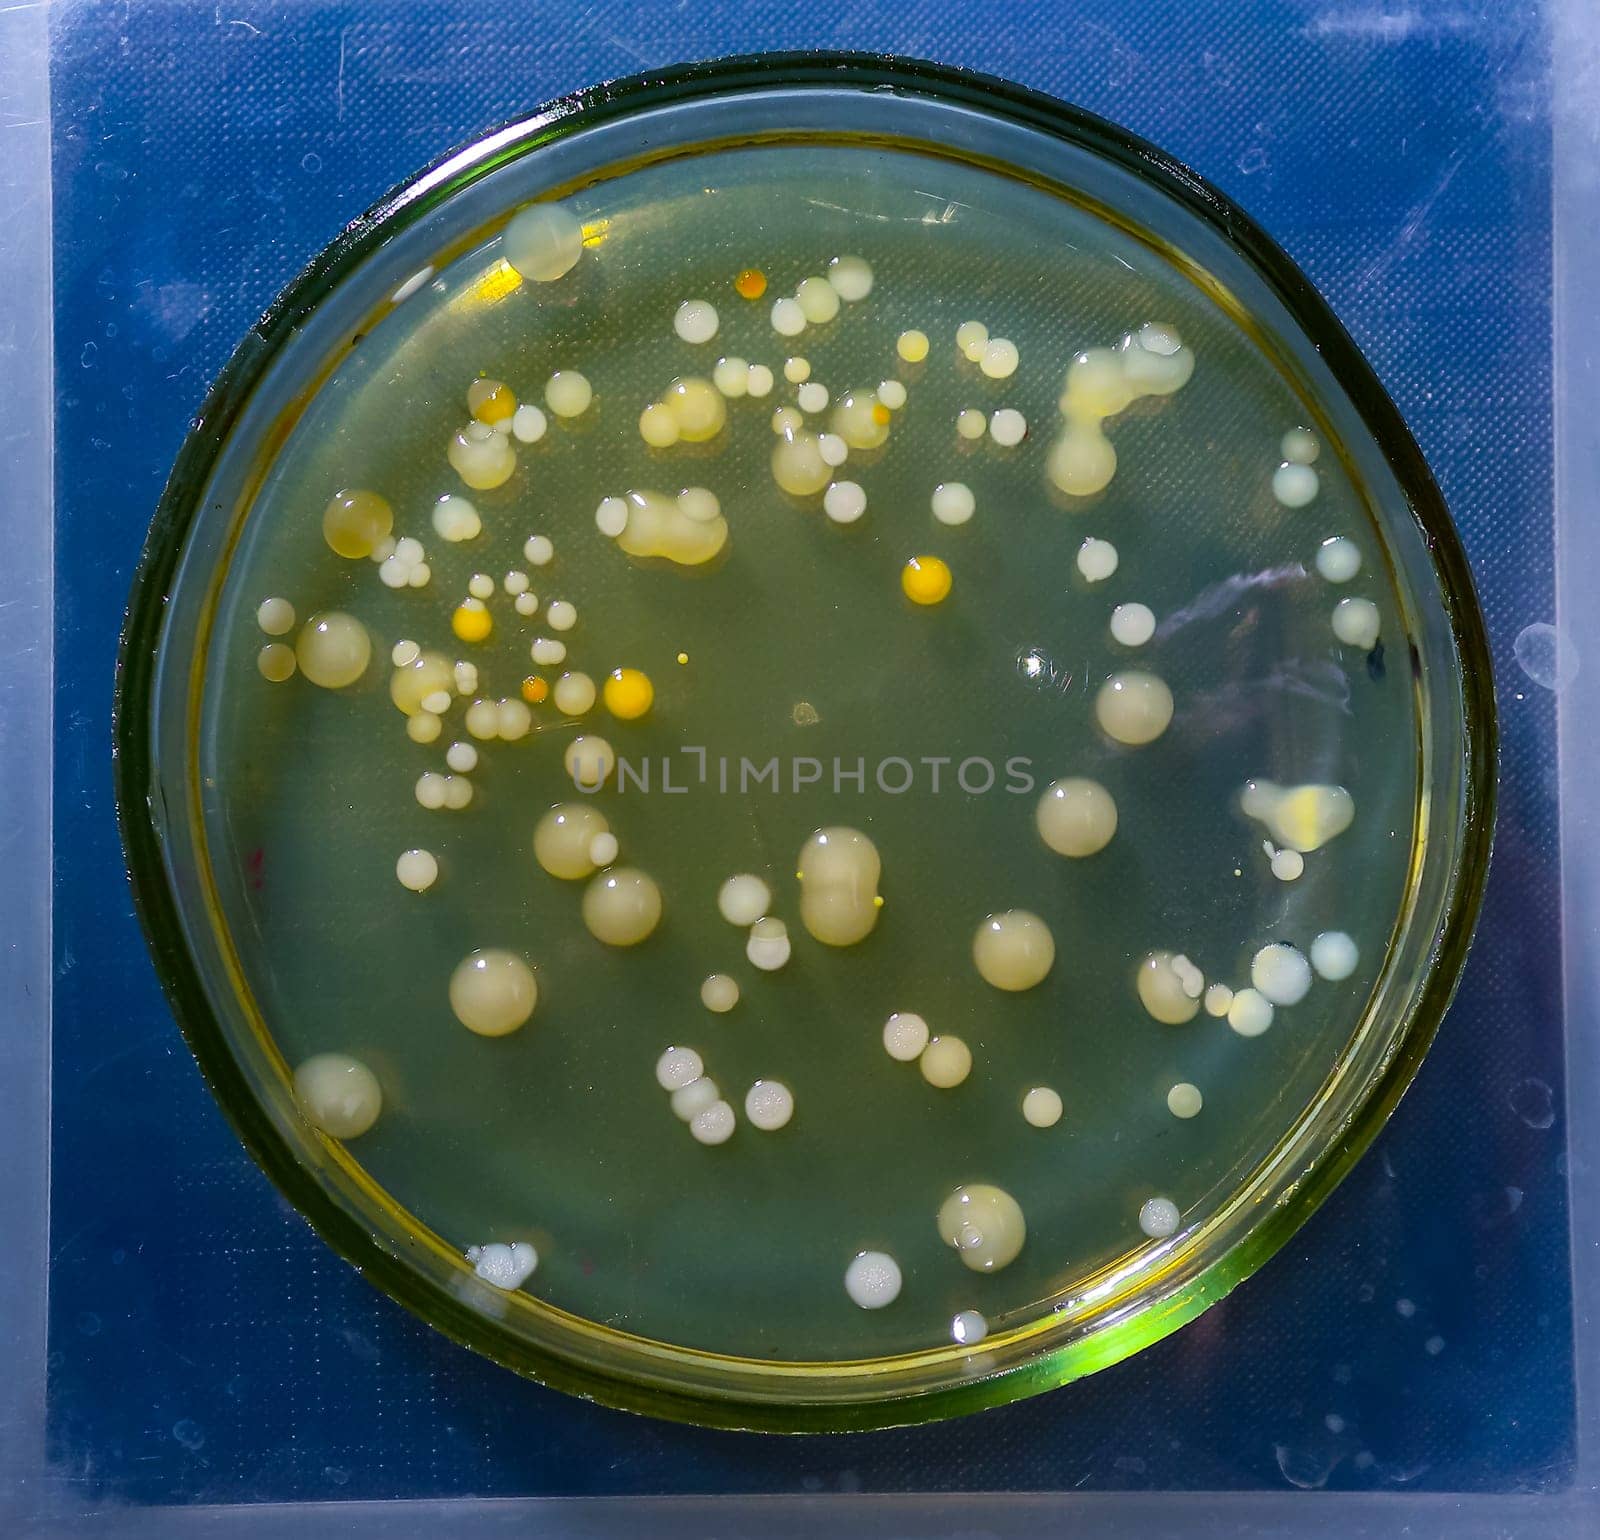 Colonies of pathogenic bacteria in a Petri dish, microbiological studies by Hydrobiolog